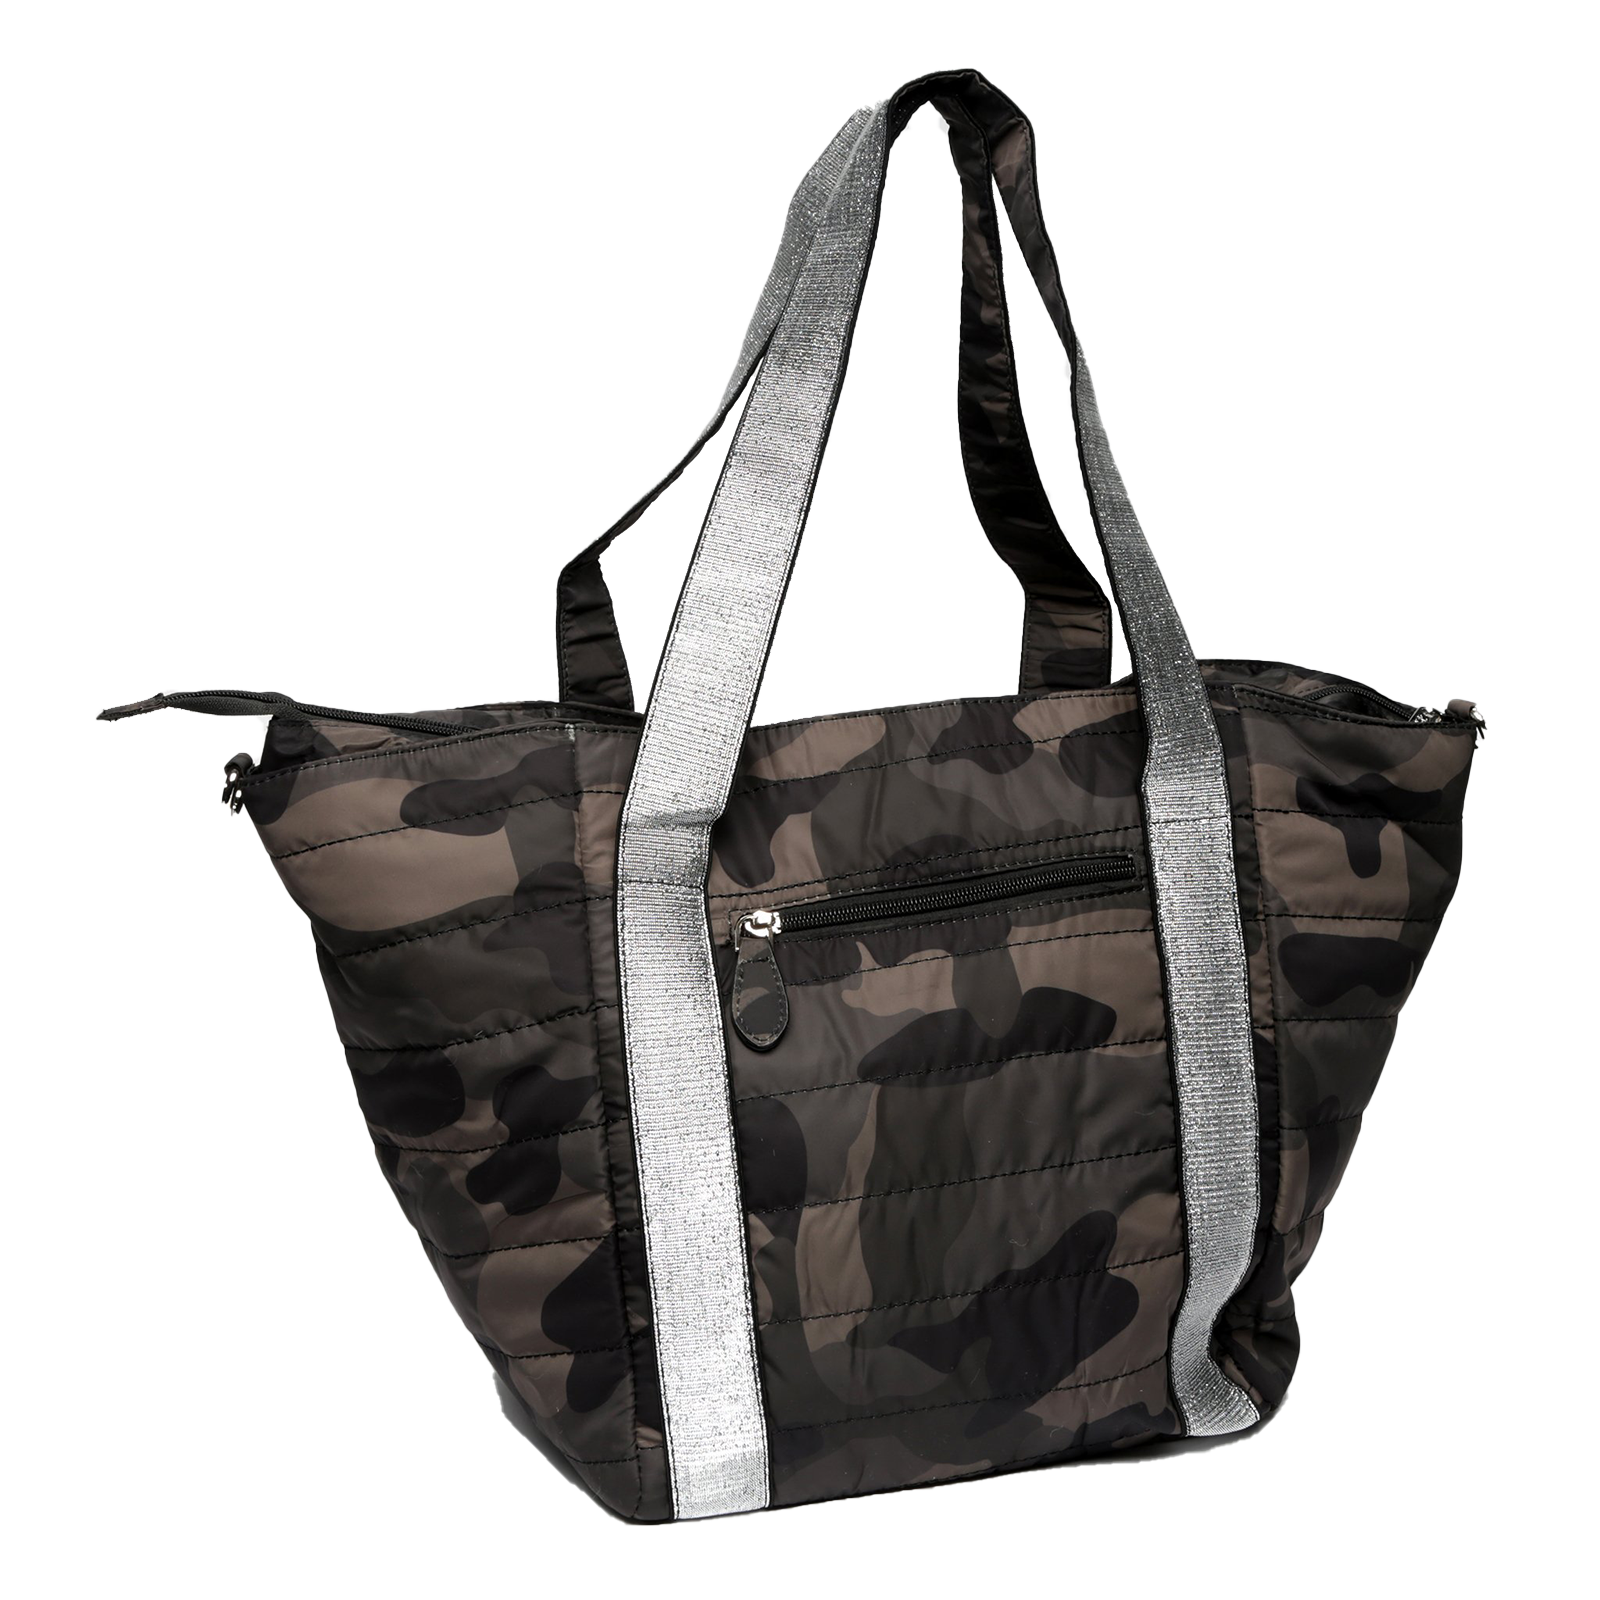 Camo Nylon Quilted Tote Bag